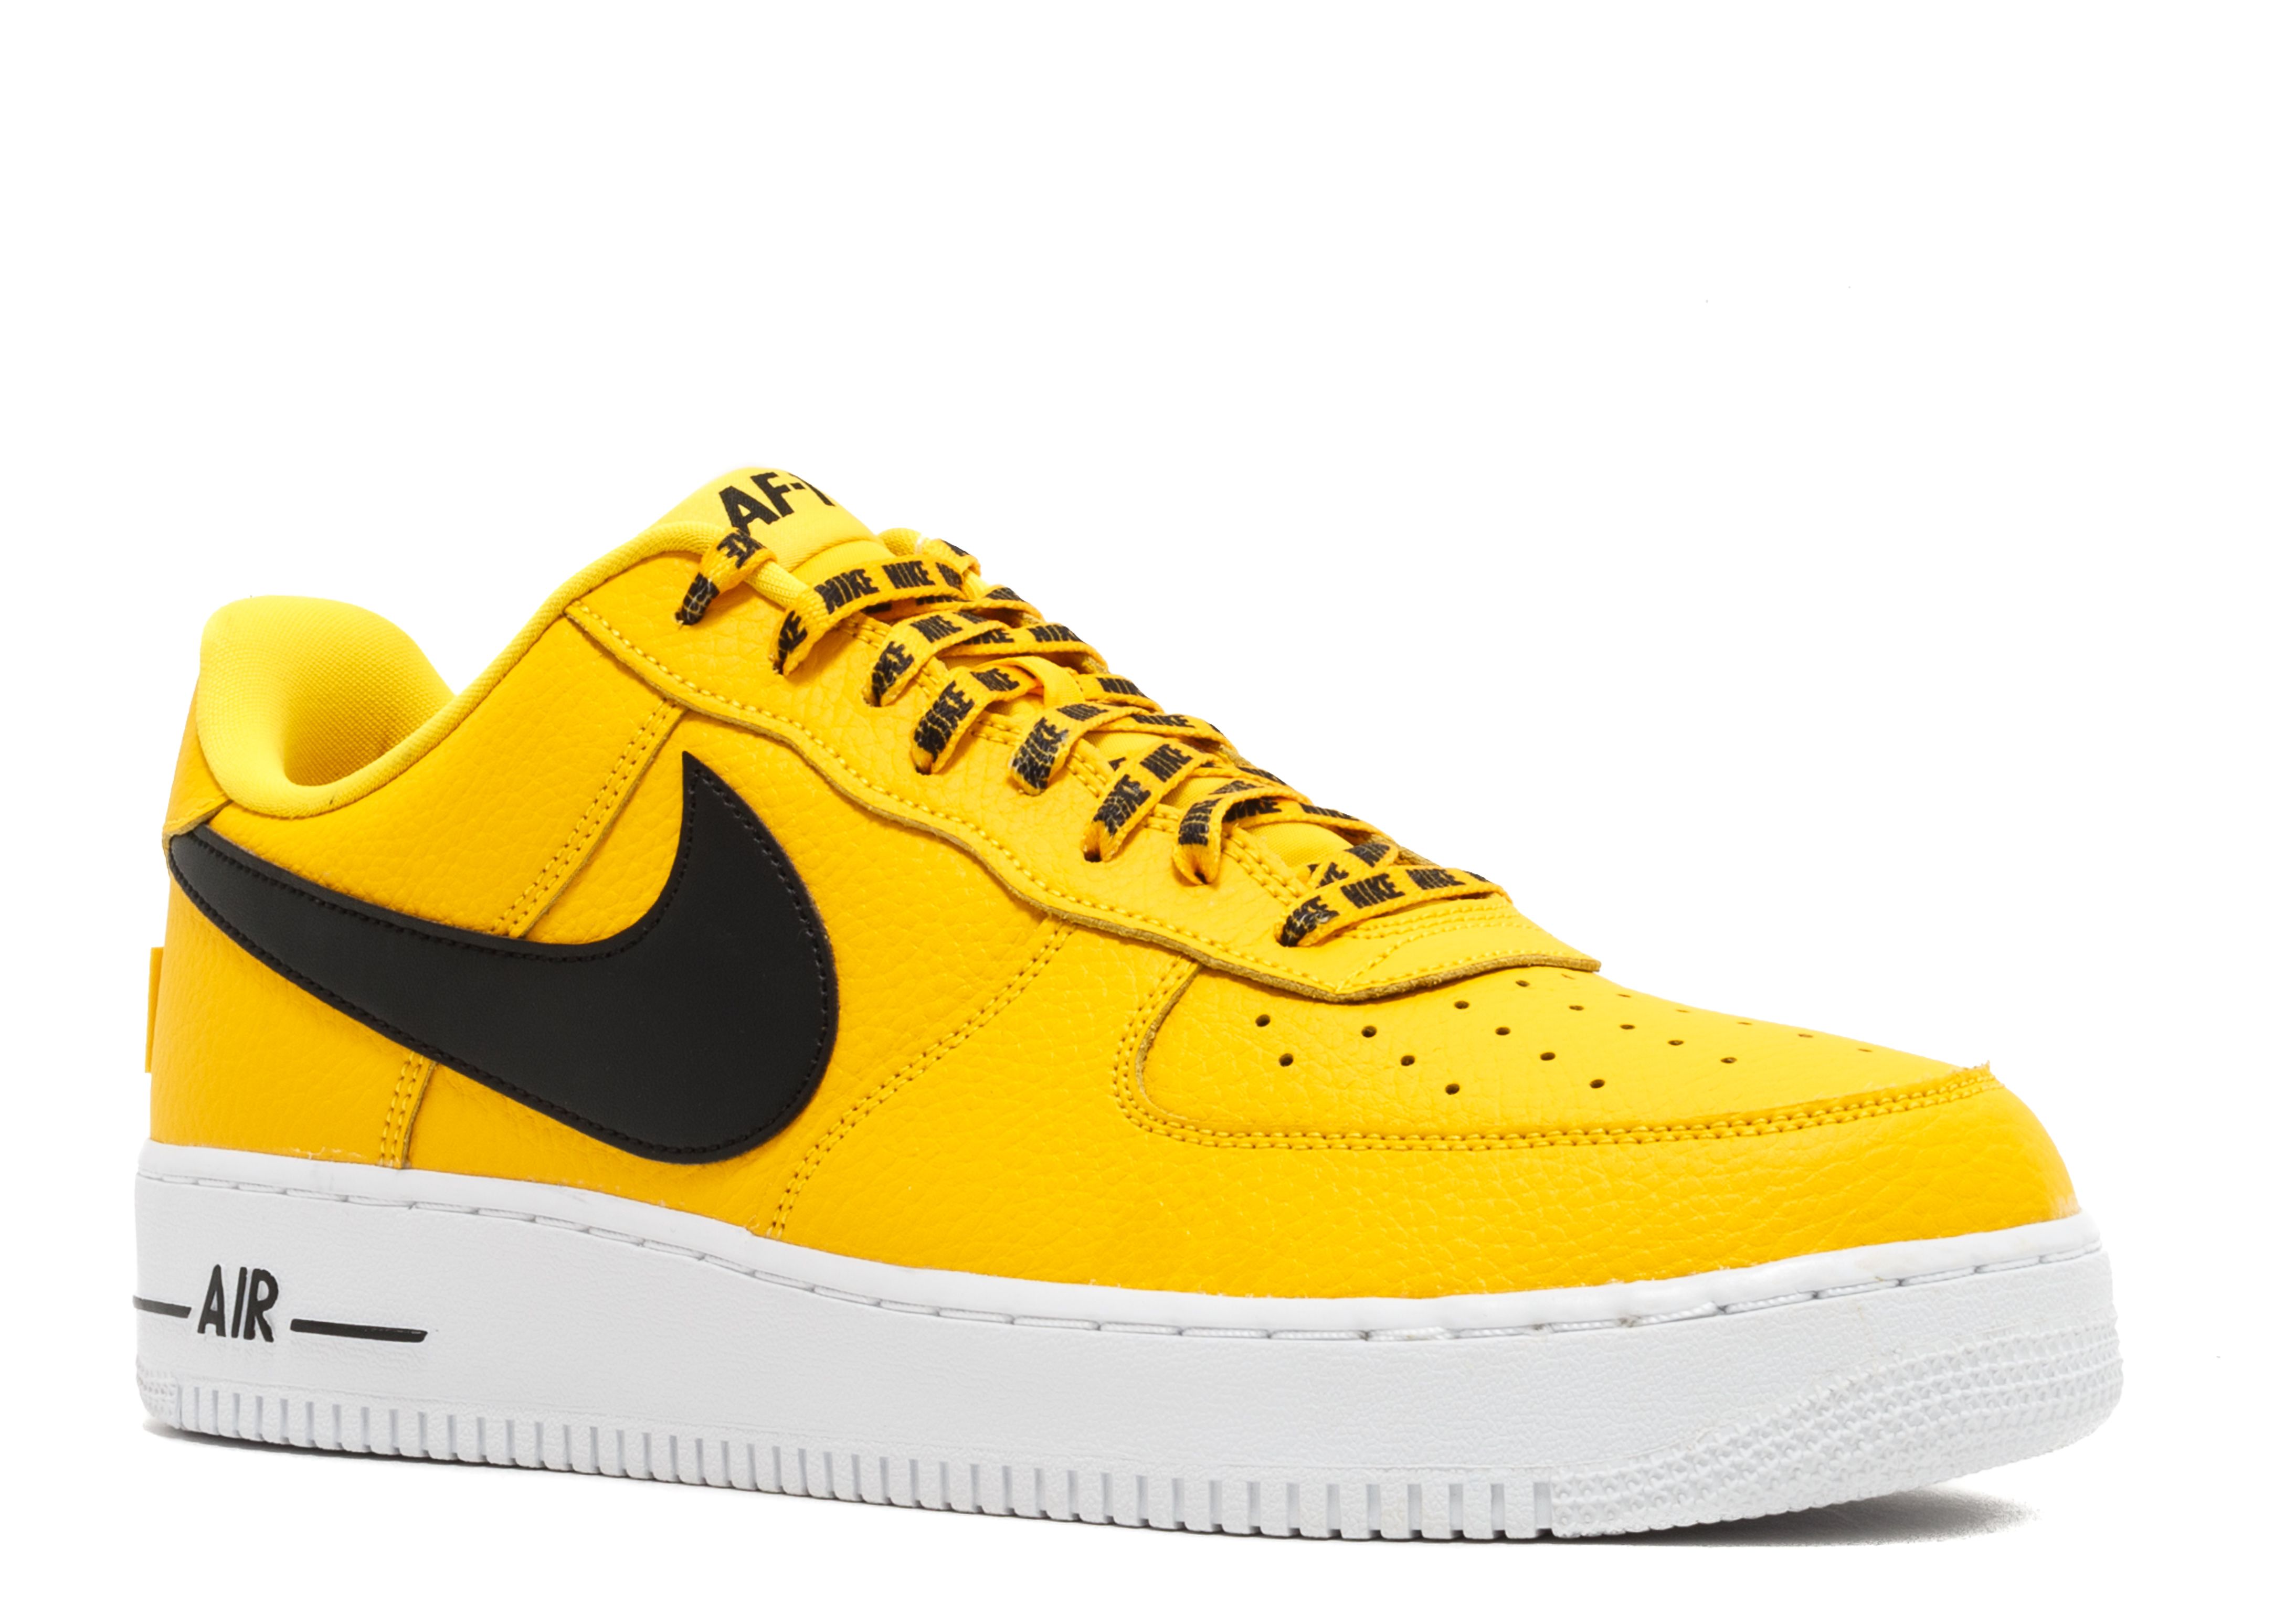 Air Force 1 'Statement Game' - Nike 